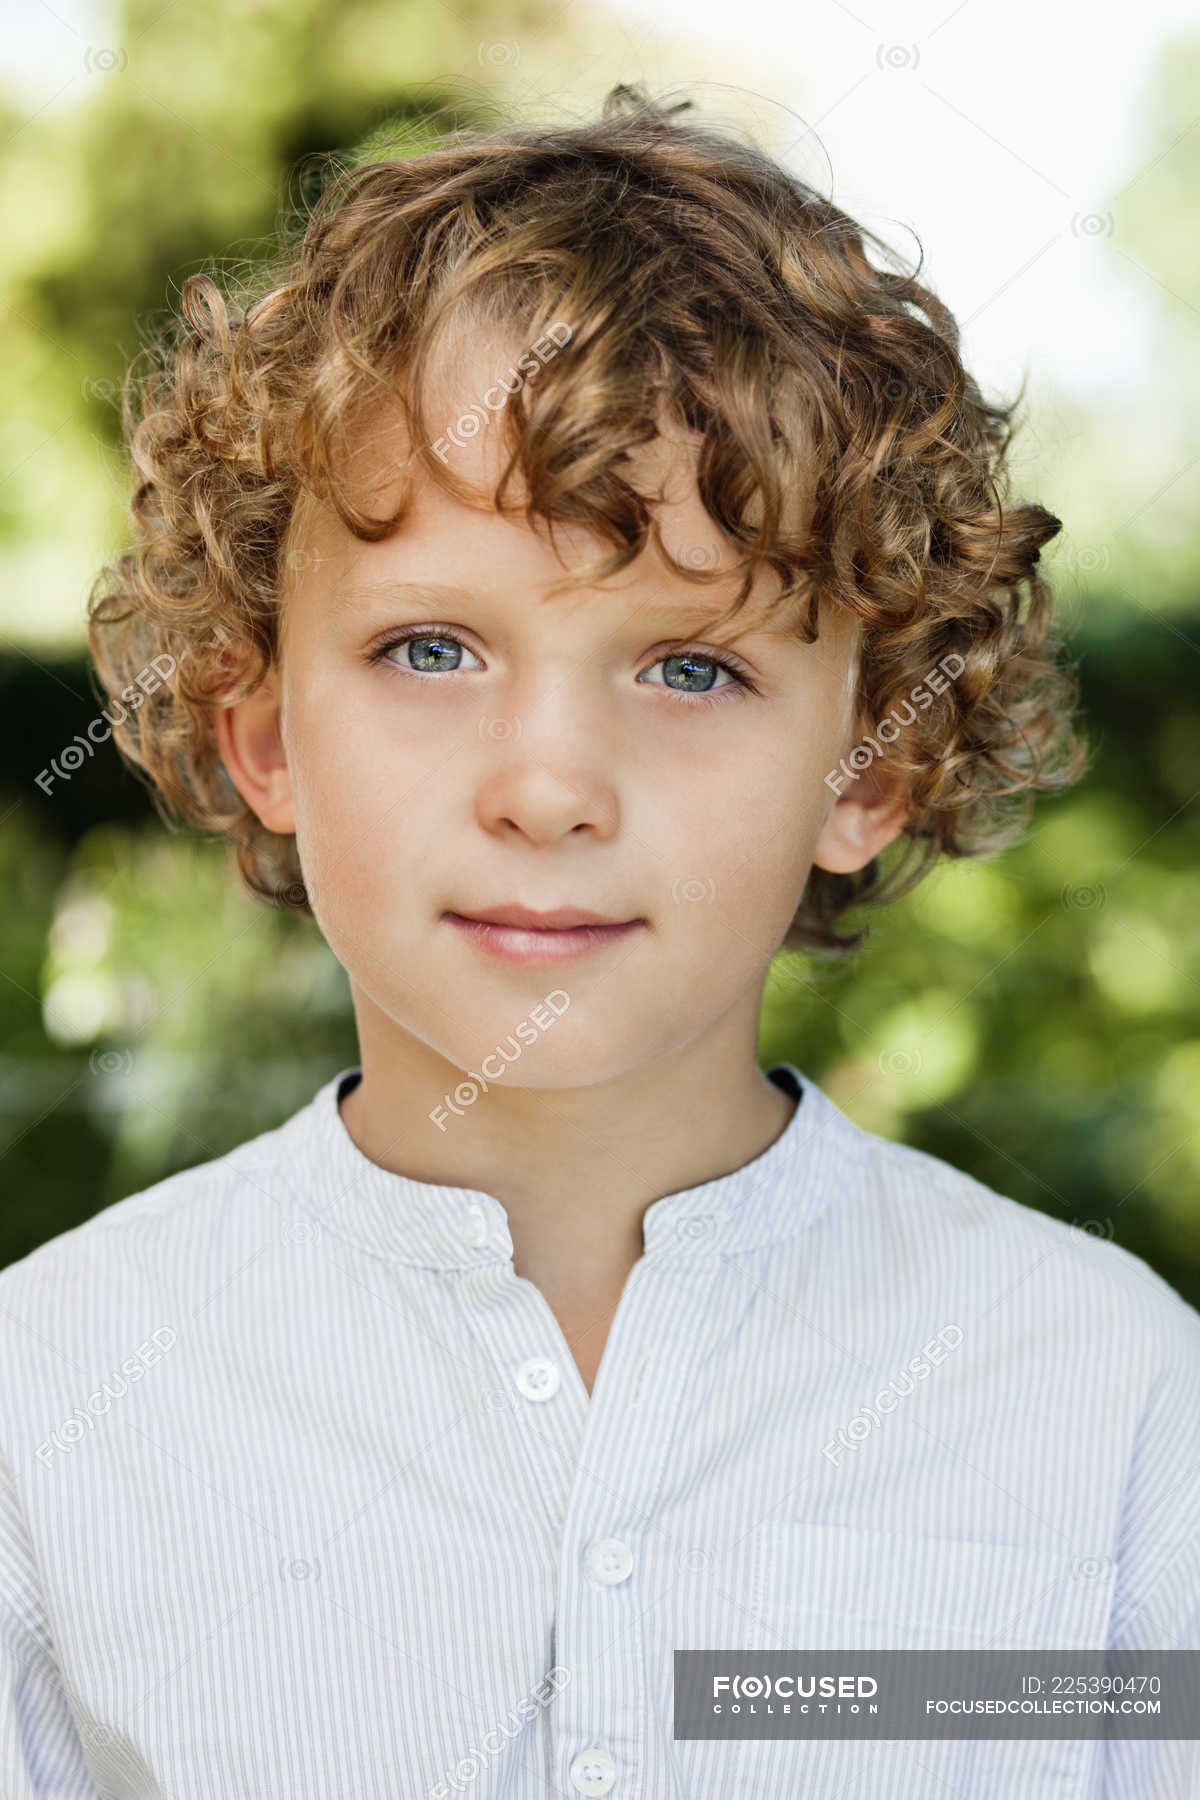 Close-up of smiling boy with curly hair in white shirt — happiness, little  boy - Stock Photo | #225390470